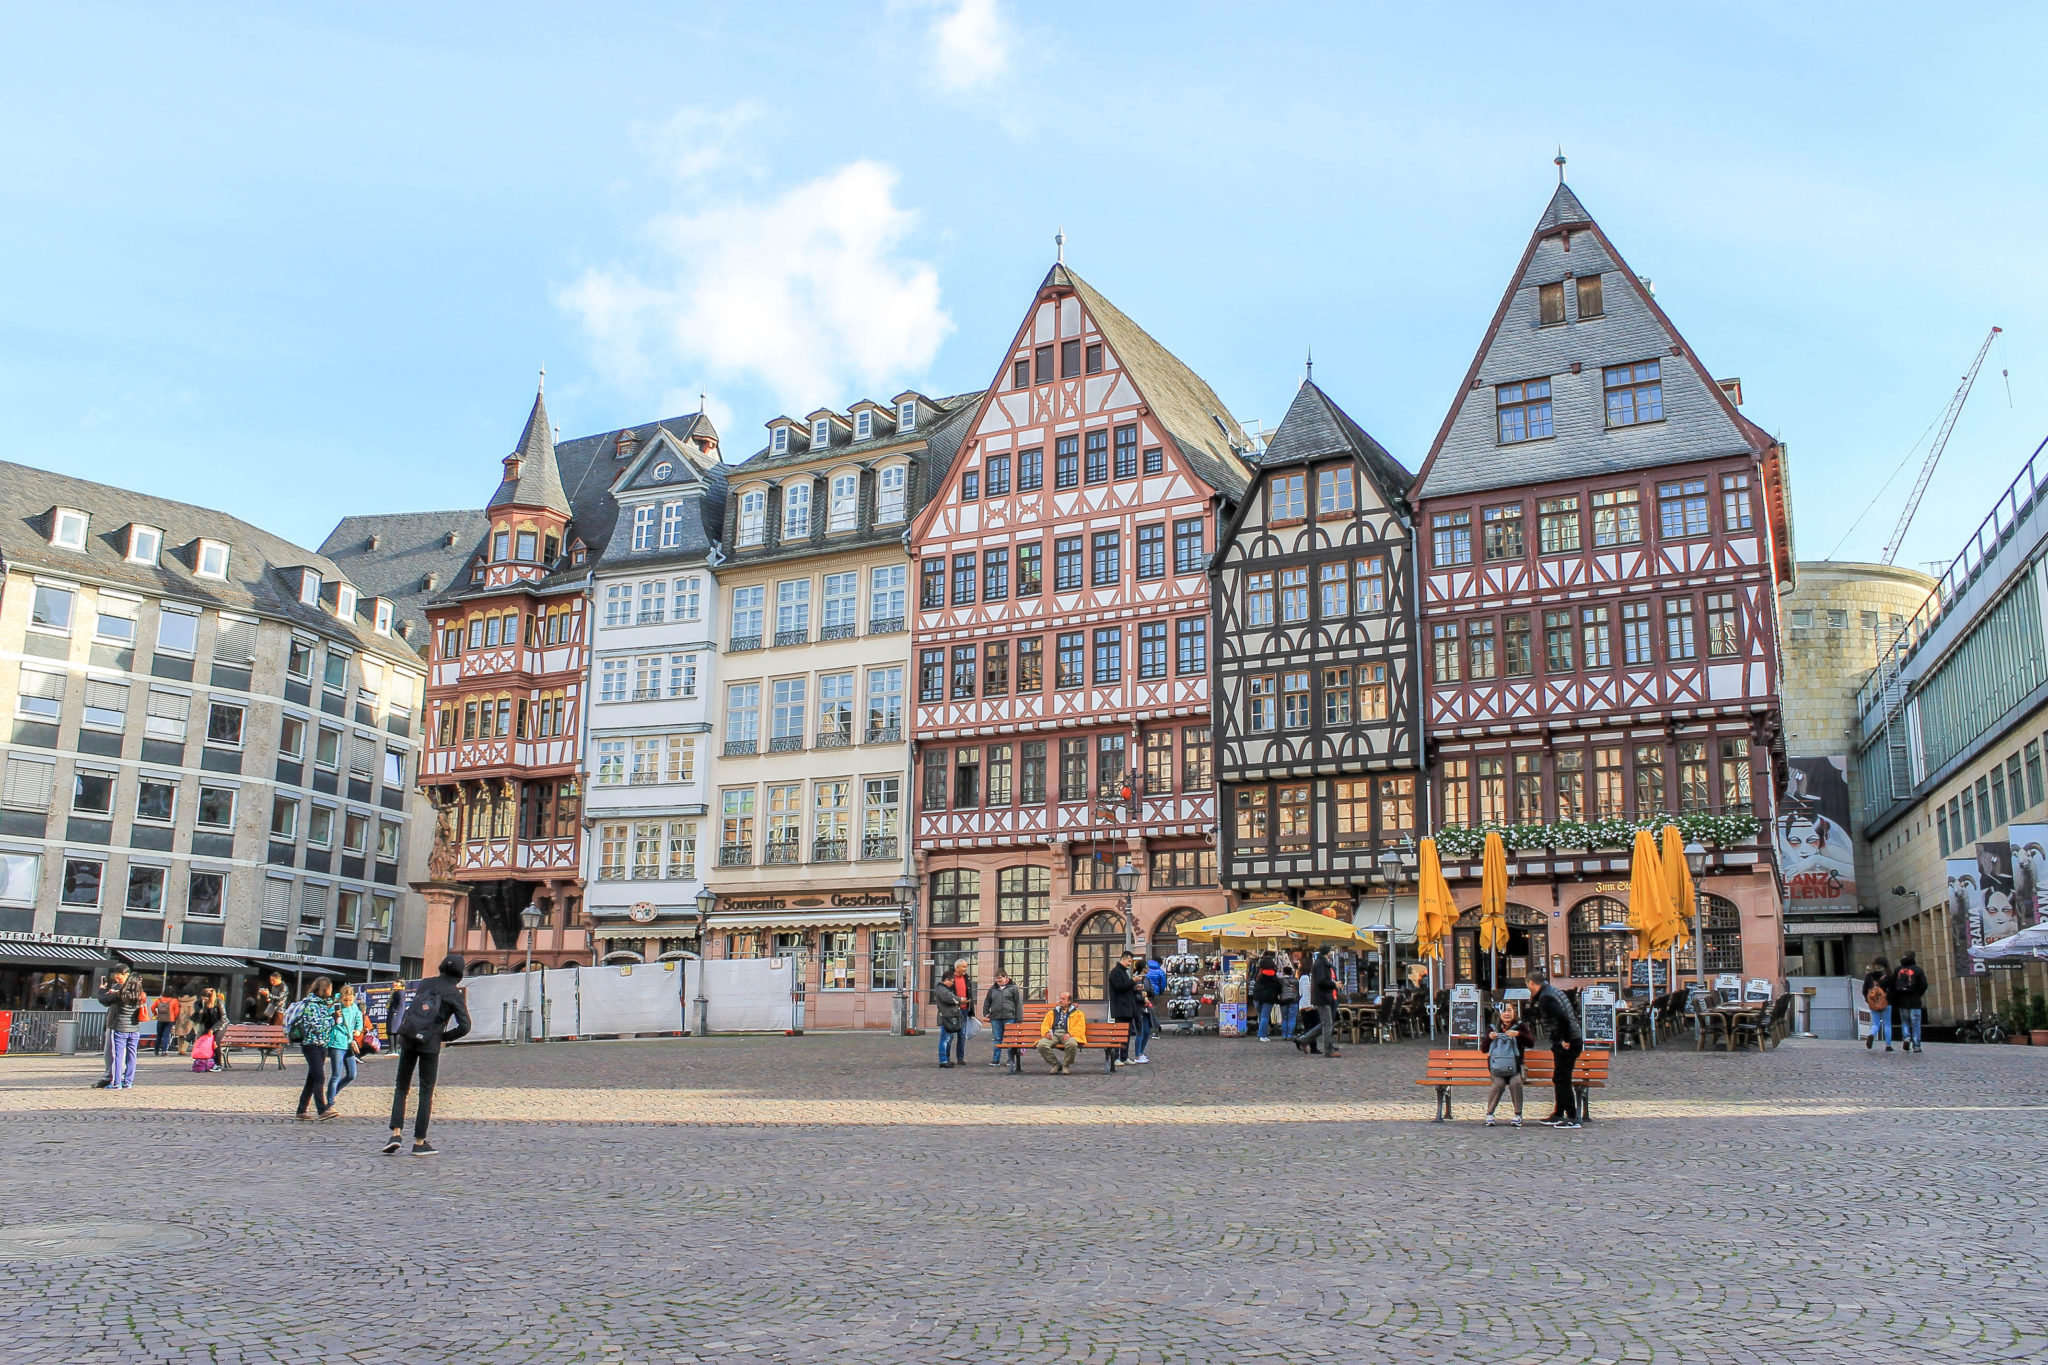 Wondering how to spend your layover in Frankfurt ? Check out this layover guide to see what to do with your limited time with a focus on the Altstadt #Frankfurt #LayoverGuide #Germany